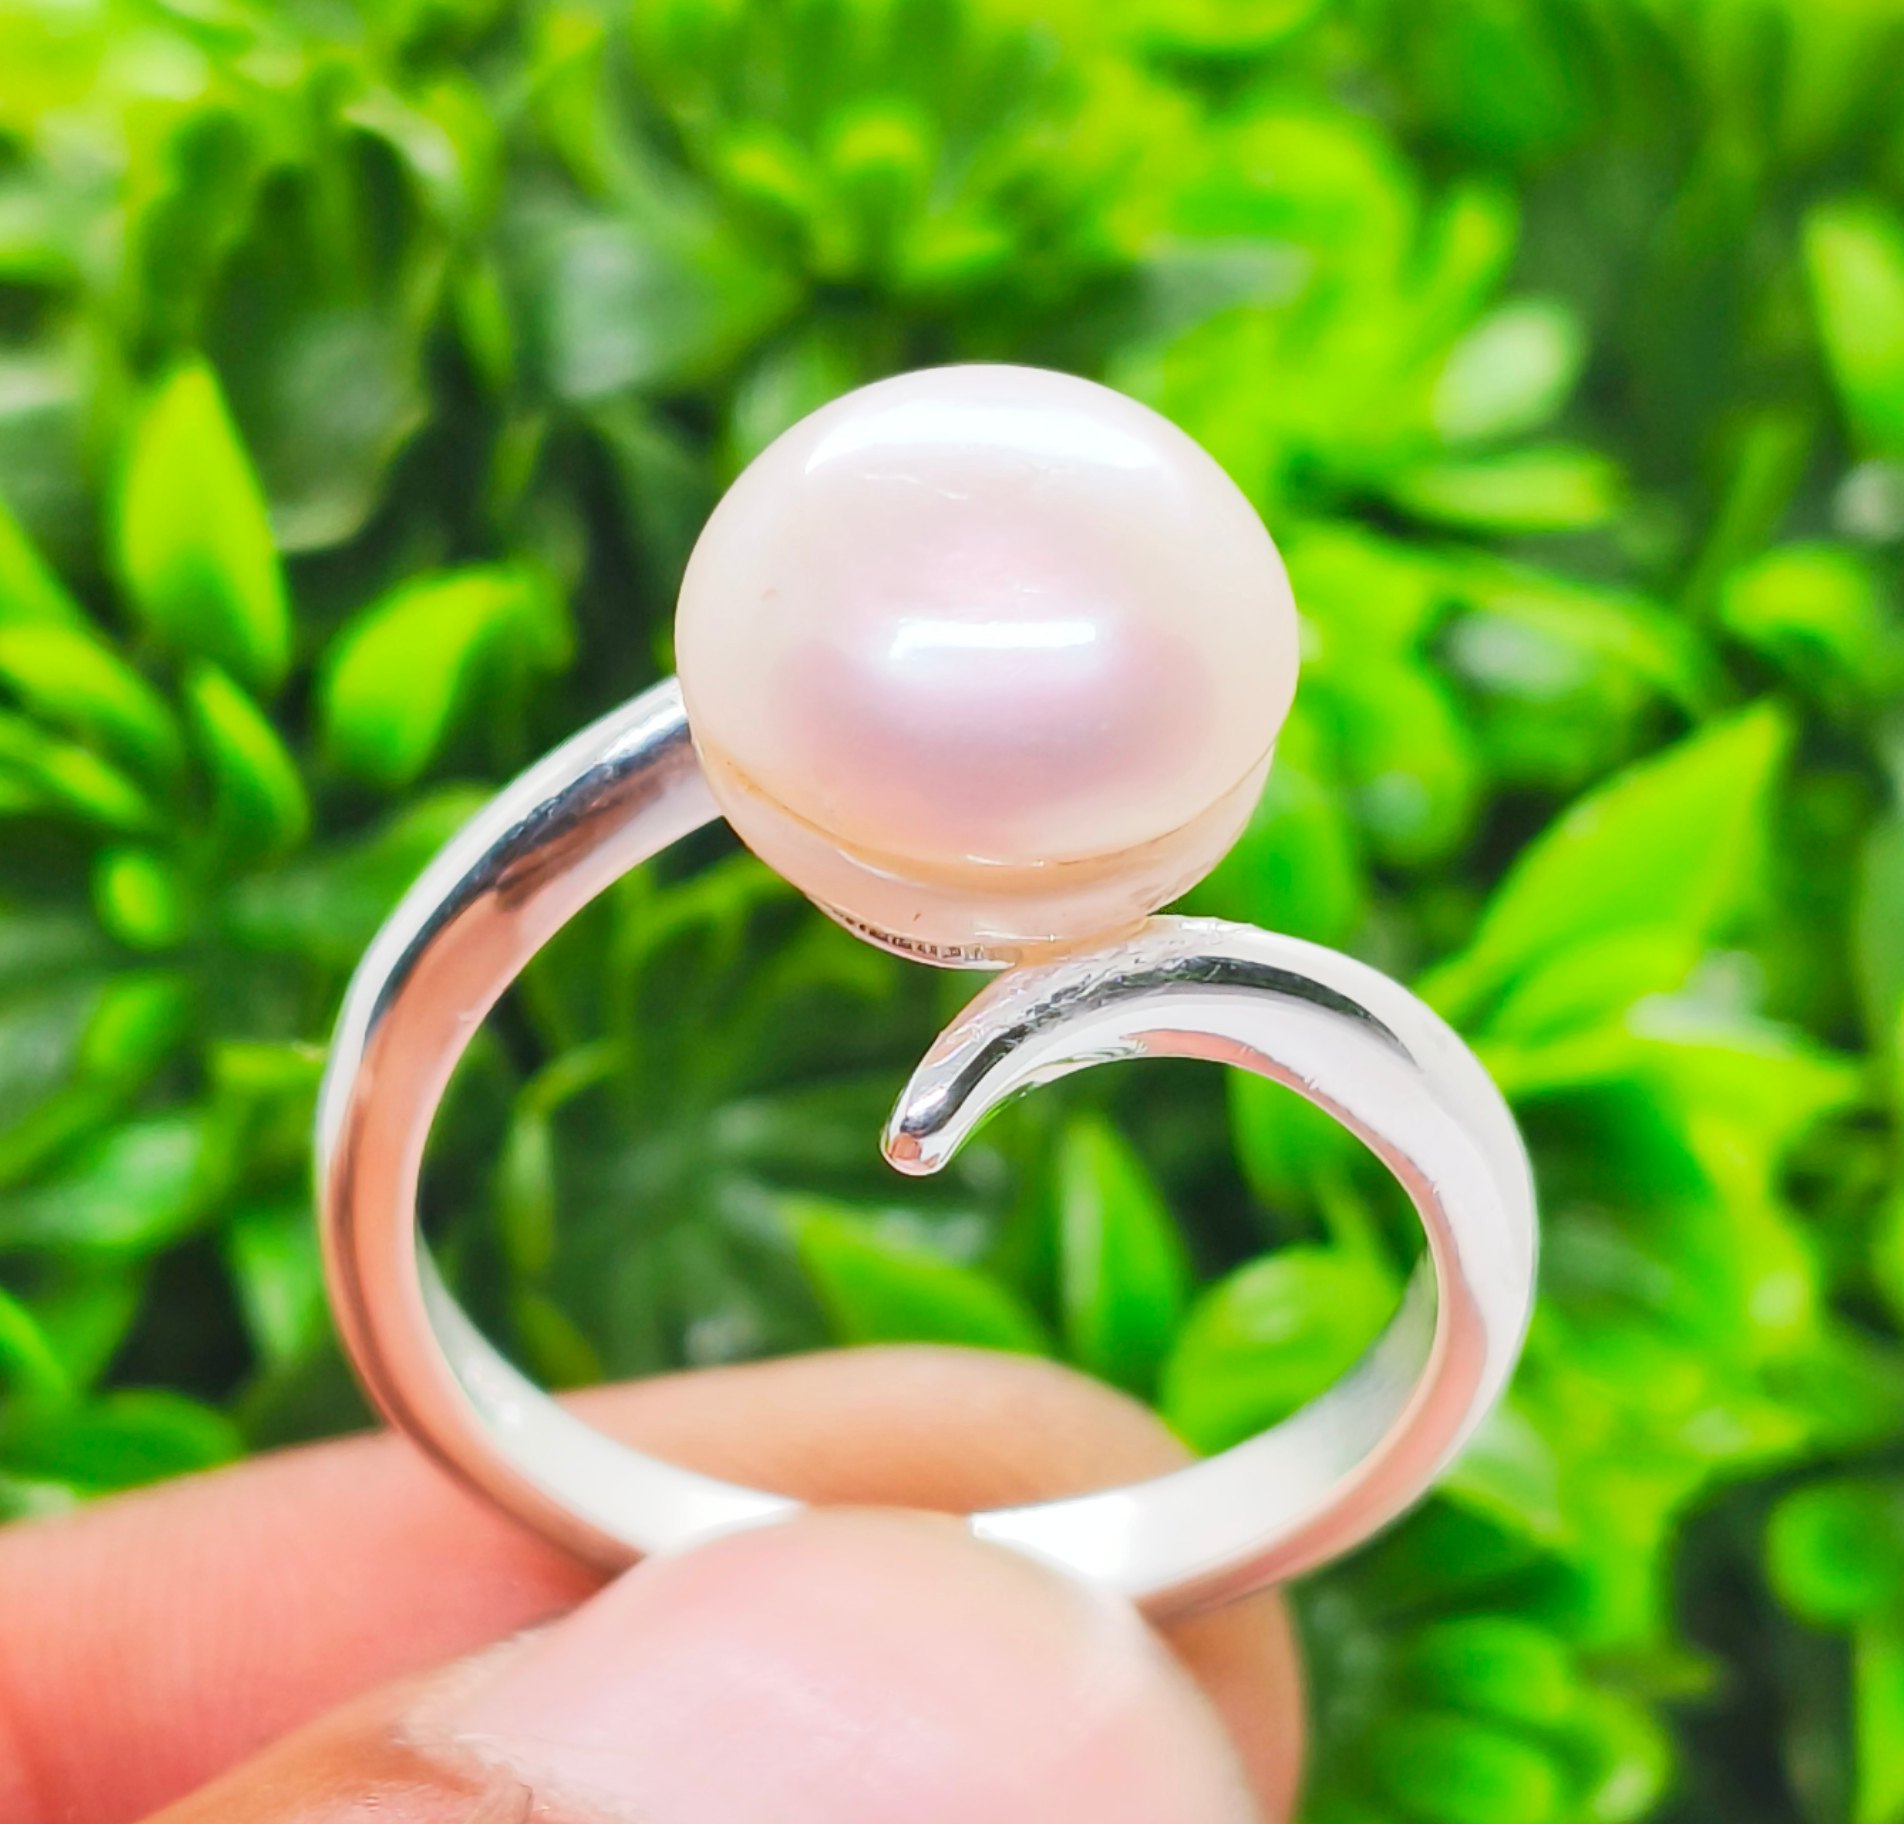 Silver Pearl Ring